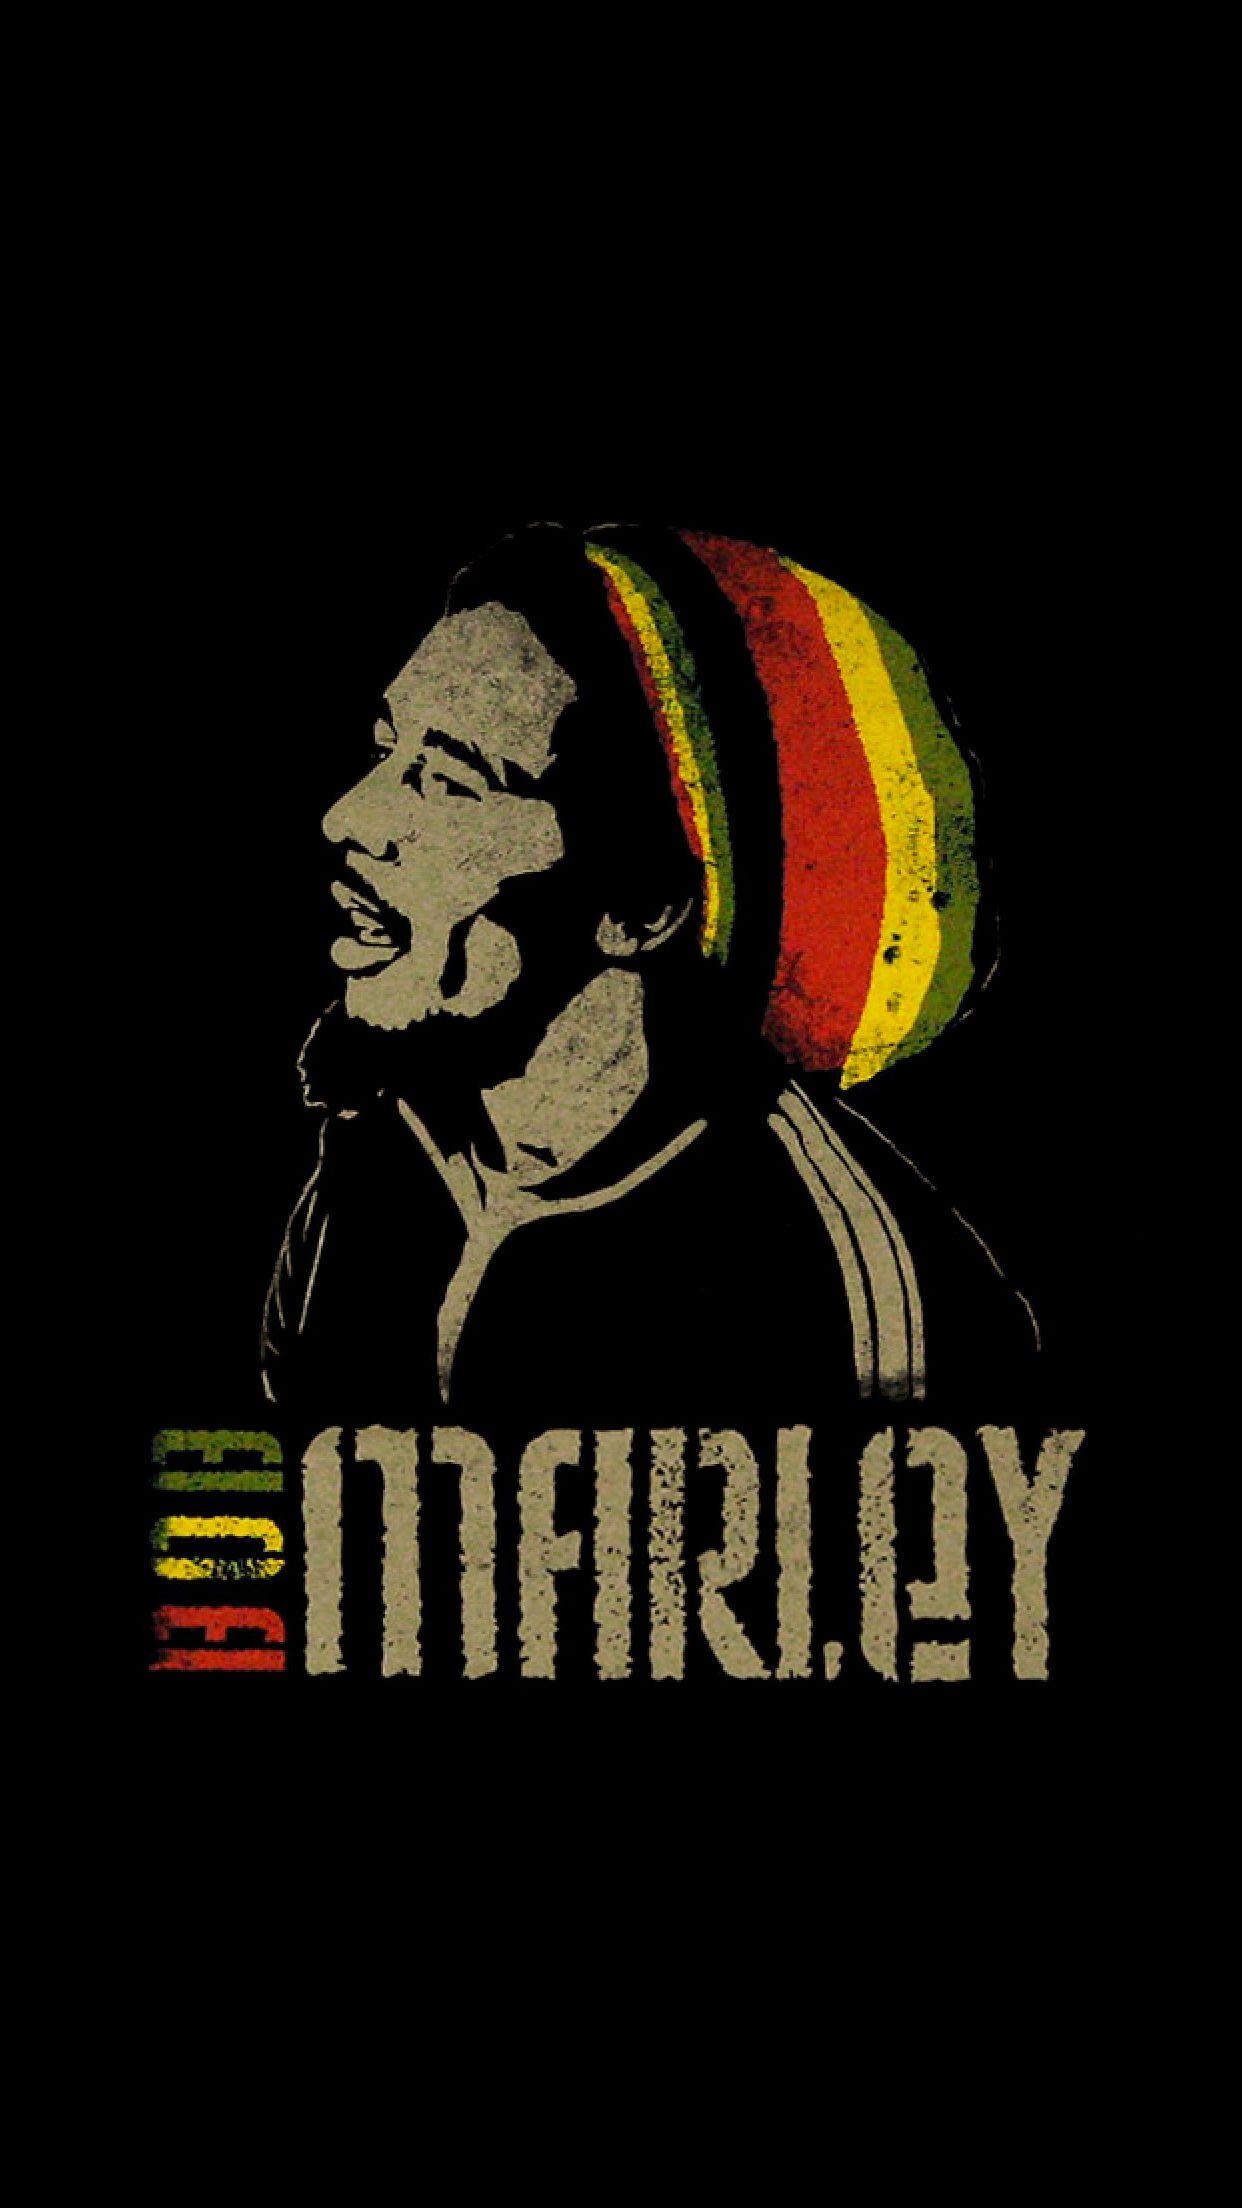 Bob Marley: A Jamaican singer-songwriter who achieved international fame through a series of crossover reggae albums. 1250x2210 HD Background.